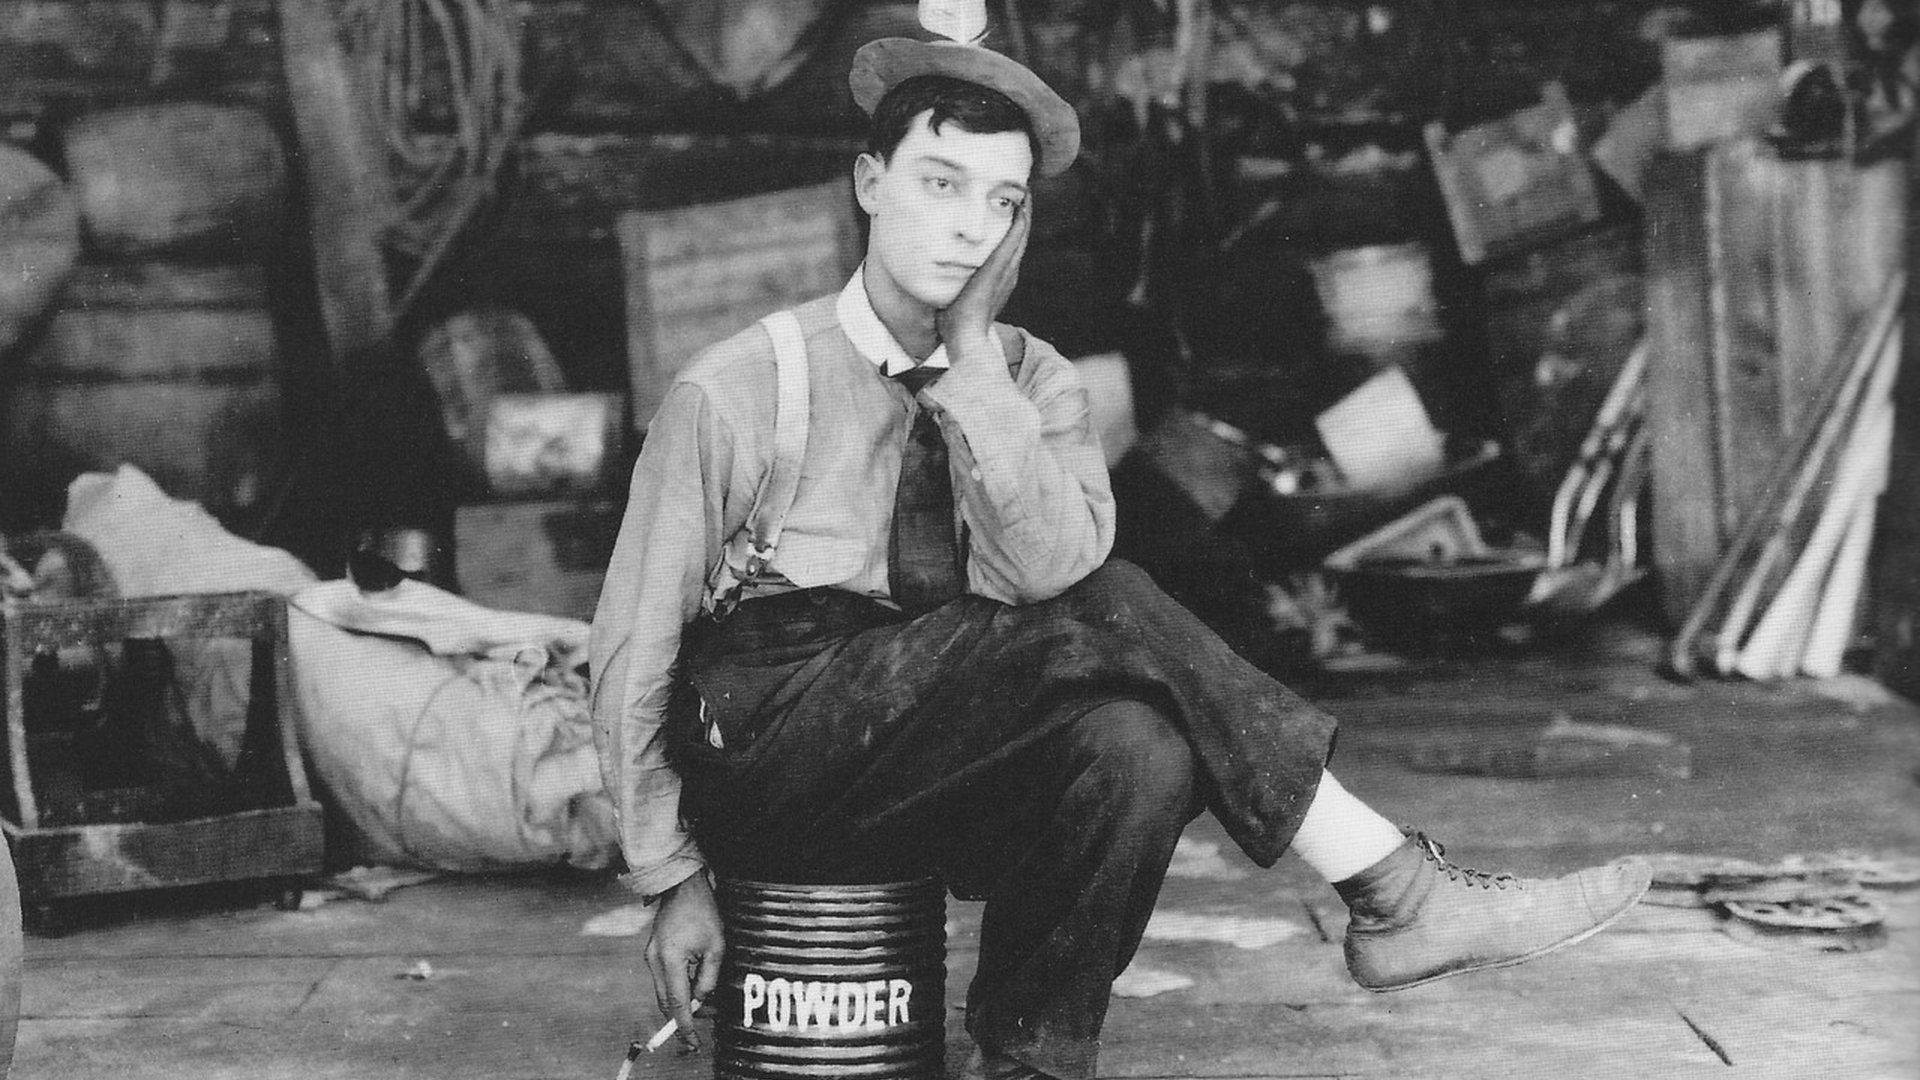 Buster Keaton in "The Paleface", 1922 Wallpaper